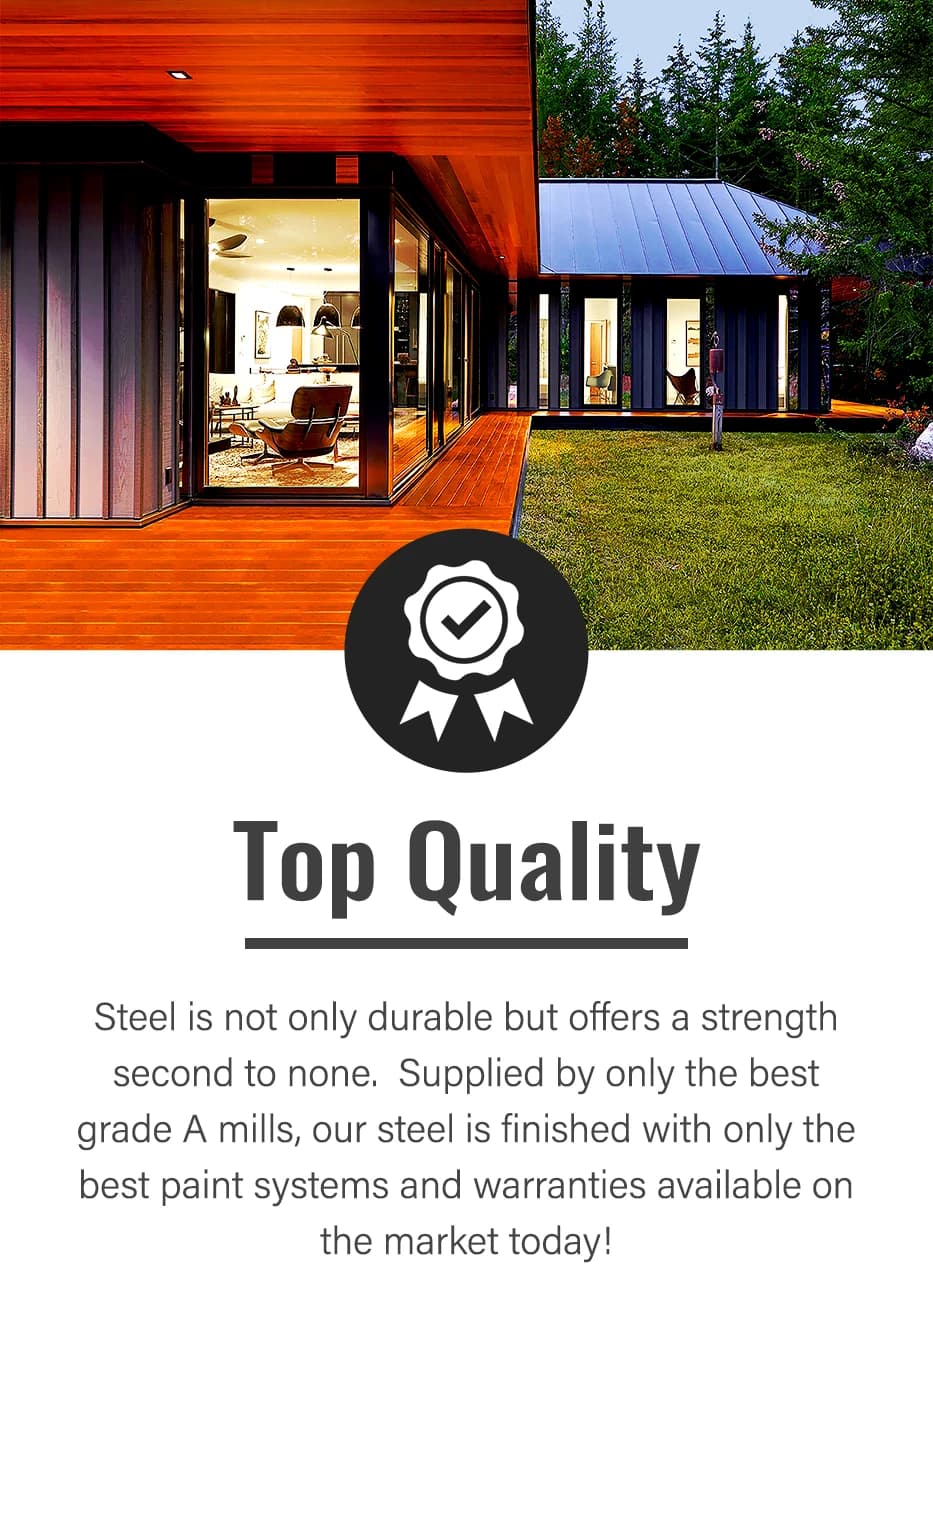 We use only the finest materials to craft our metal products.